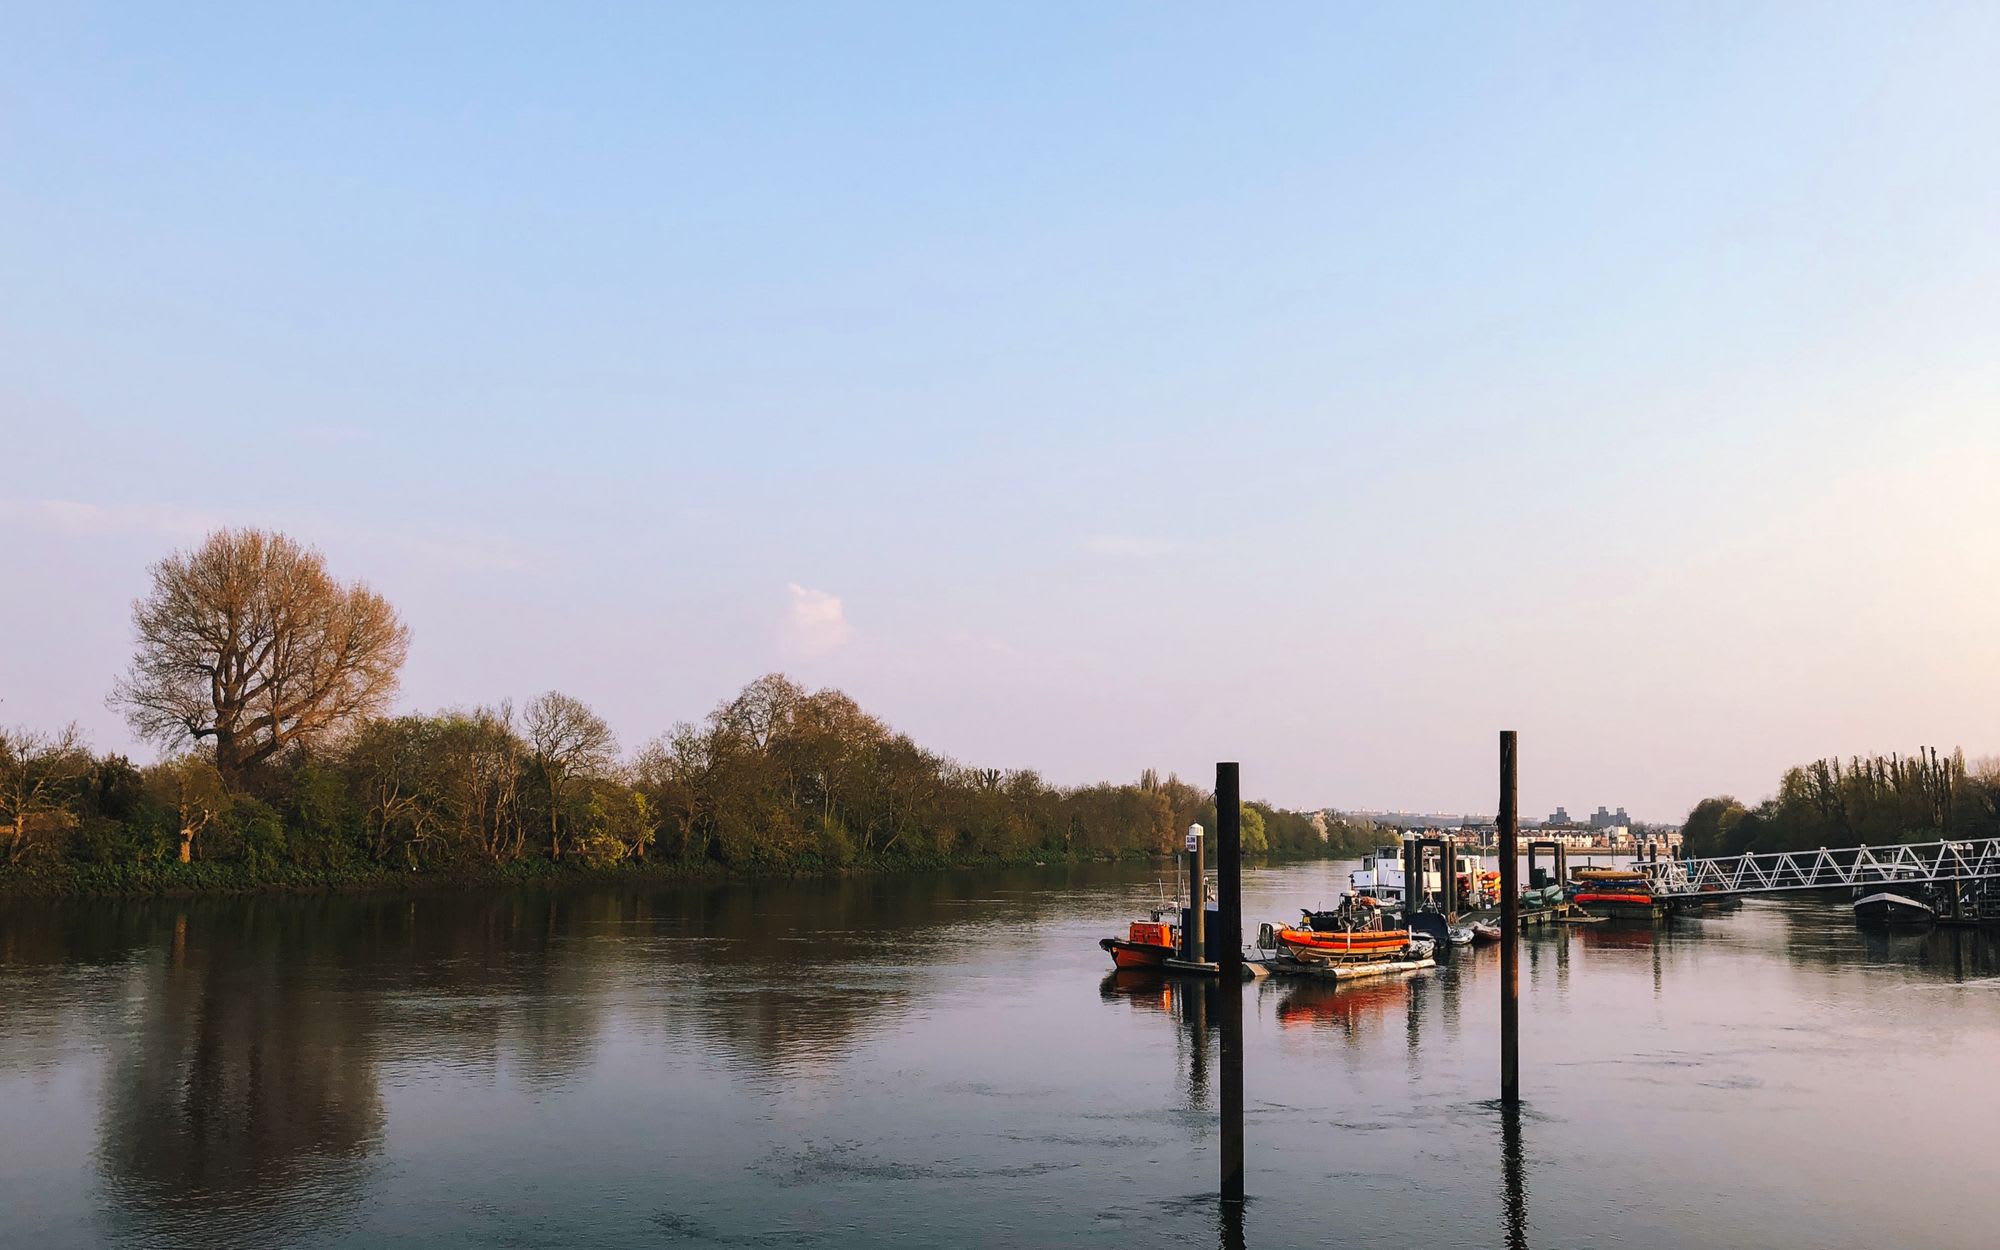 View along the River Thames in Chiswick